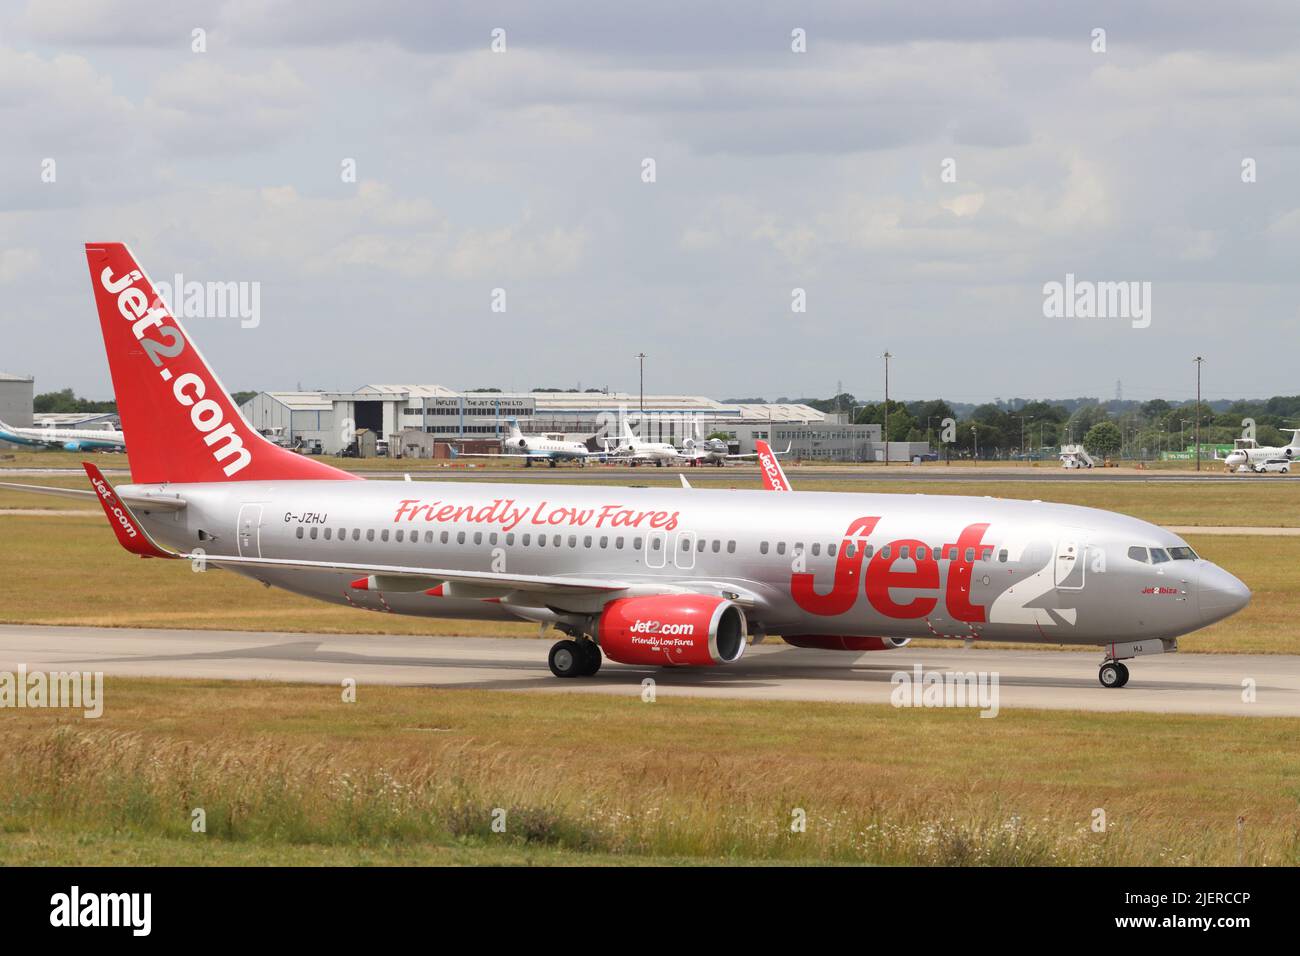 Jet2 Airways, Boeing 737 G-JZHJ, arriving at Stansted Airport, Essex, UK Stock Photo